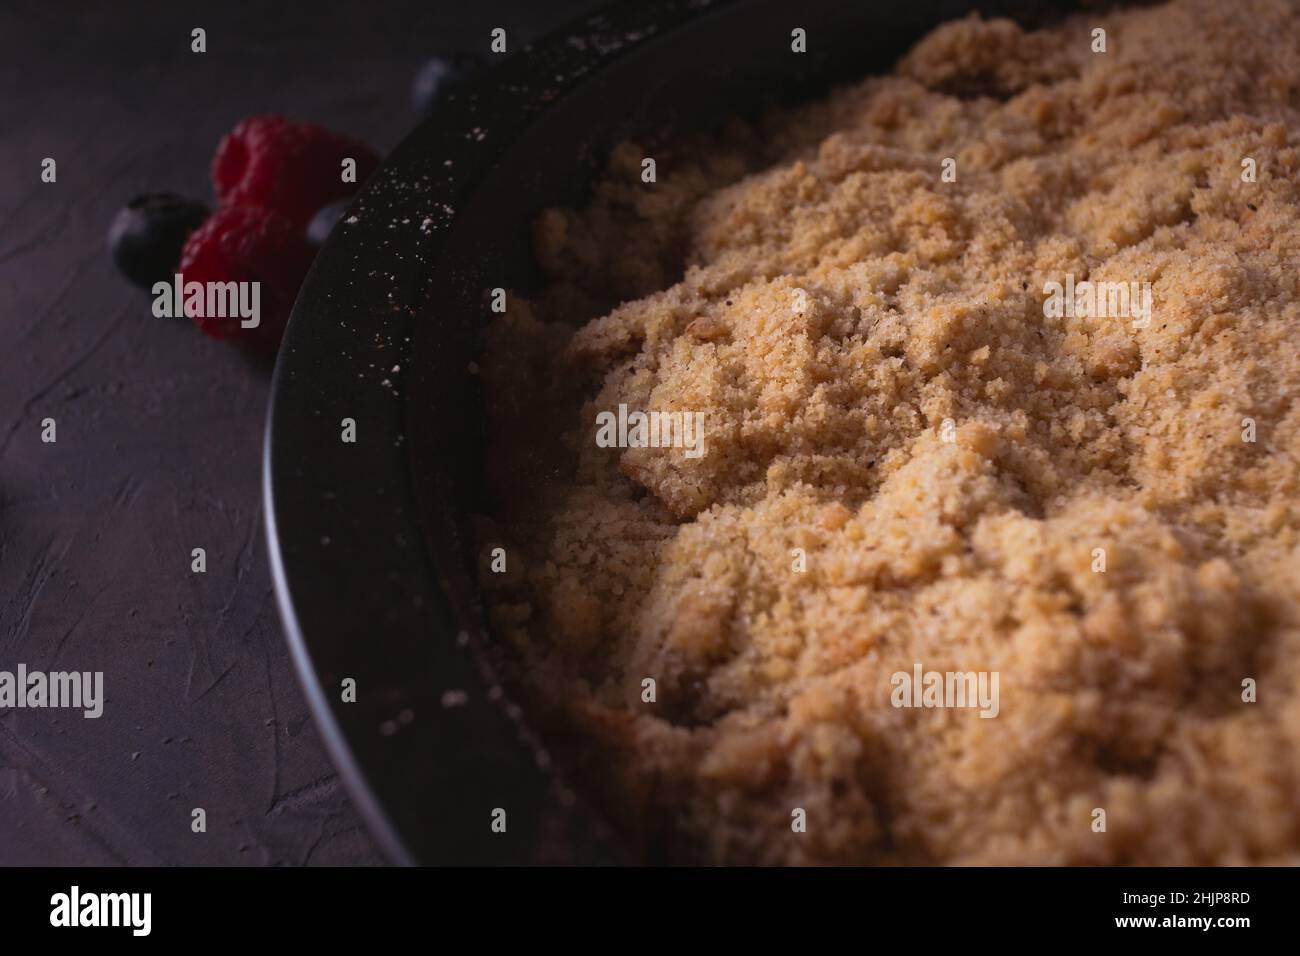 Homemade apple crumble with berries in low light. Dark food photo with copy space. Stock Photo